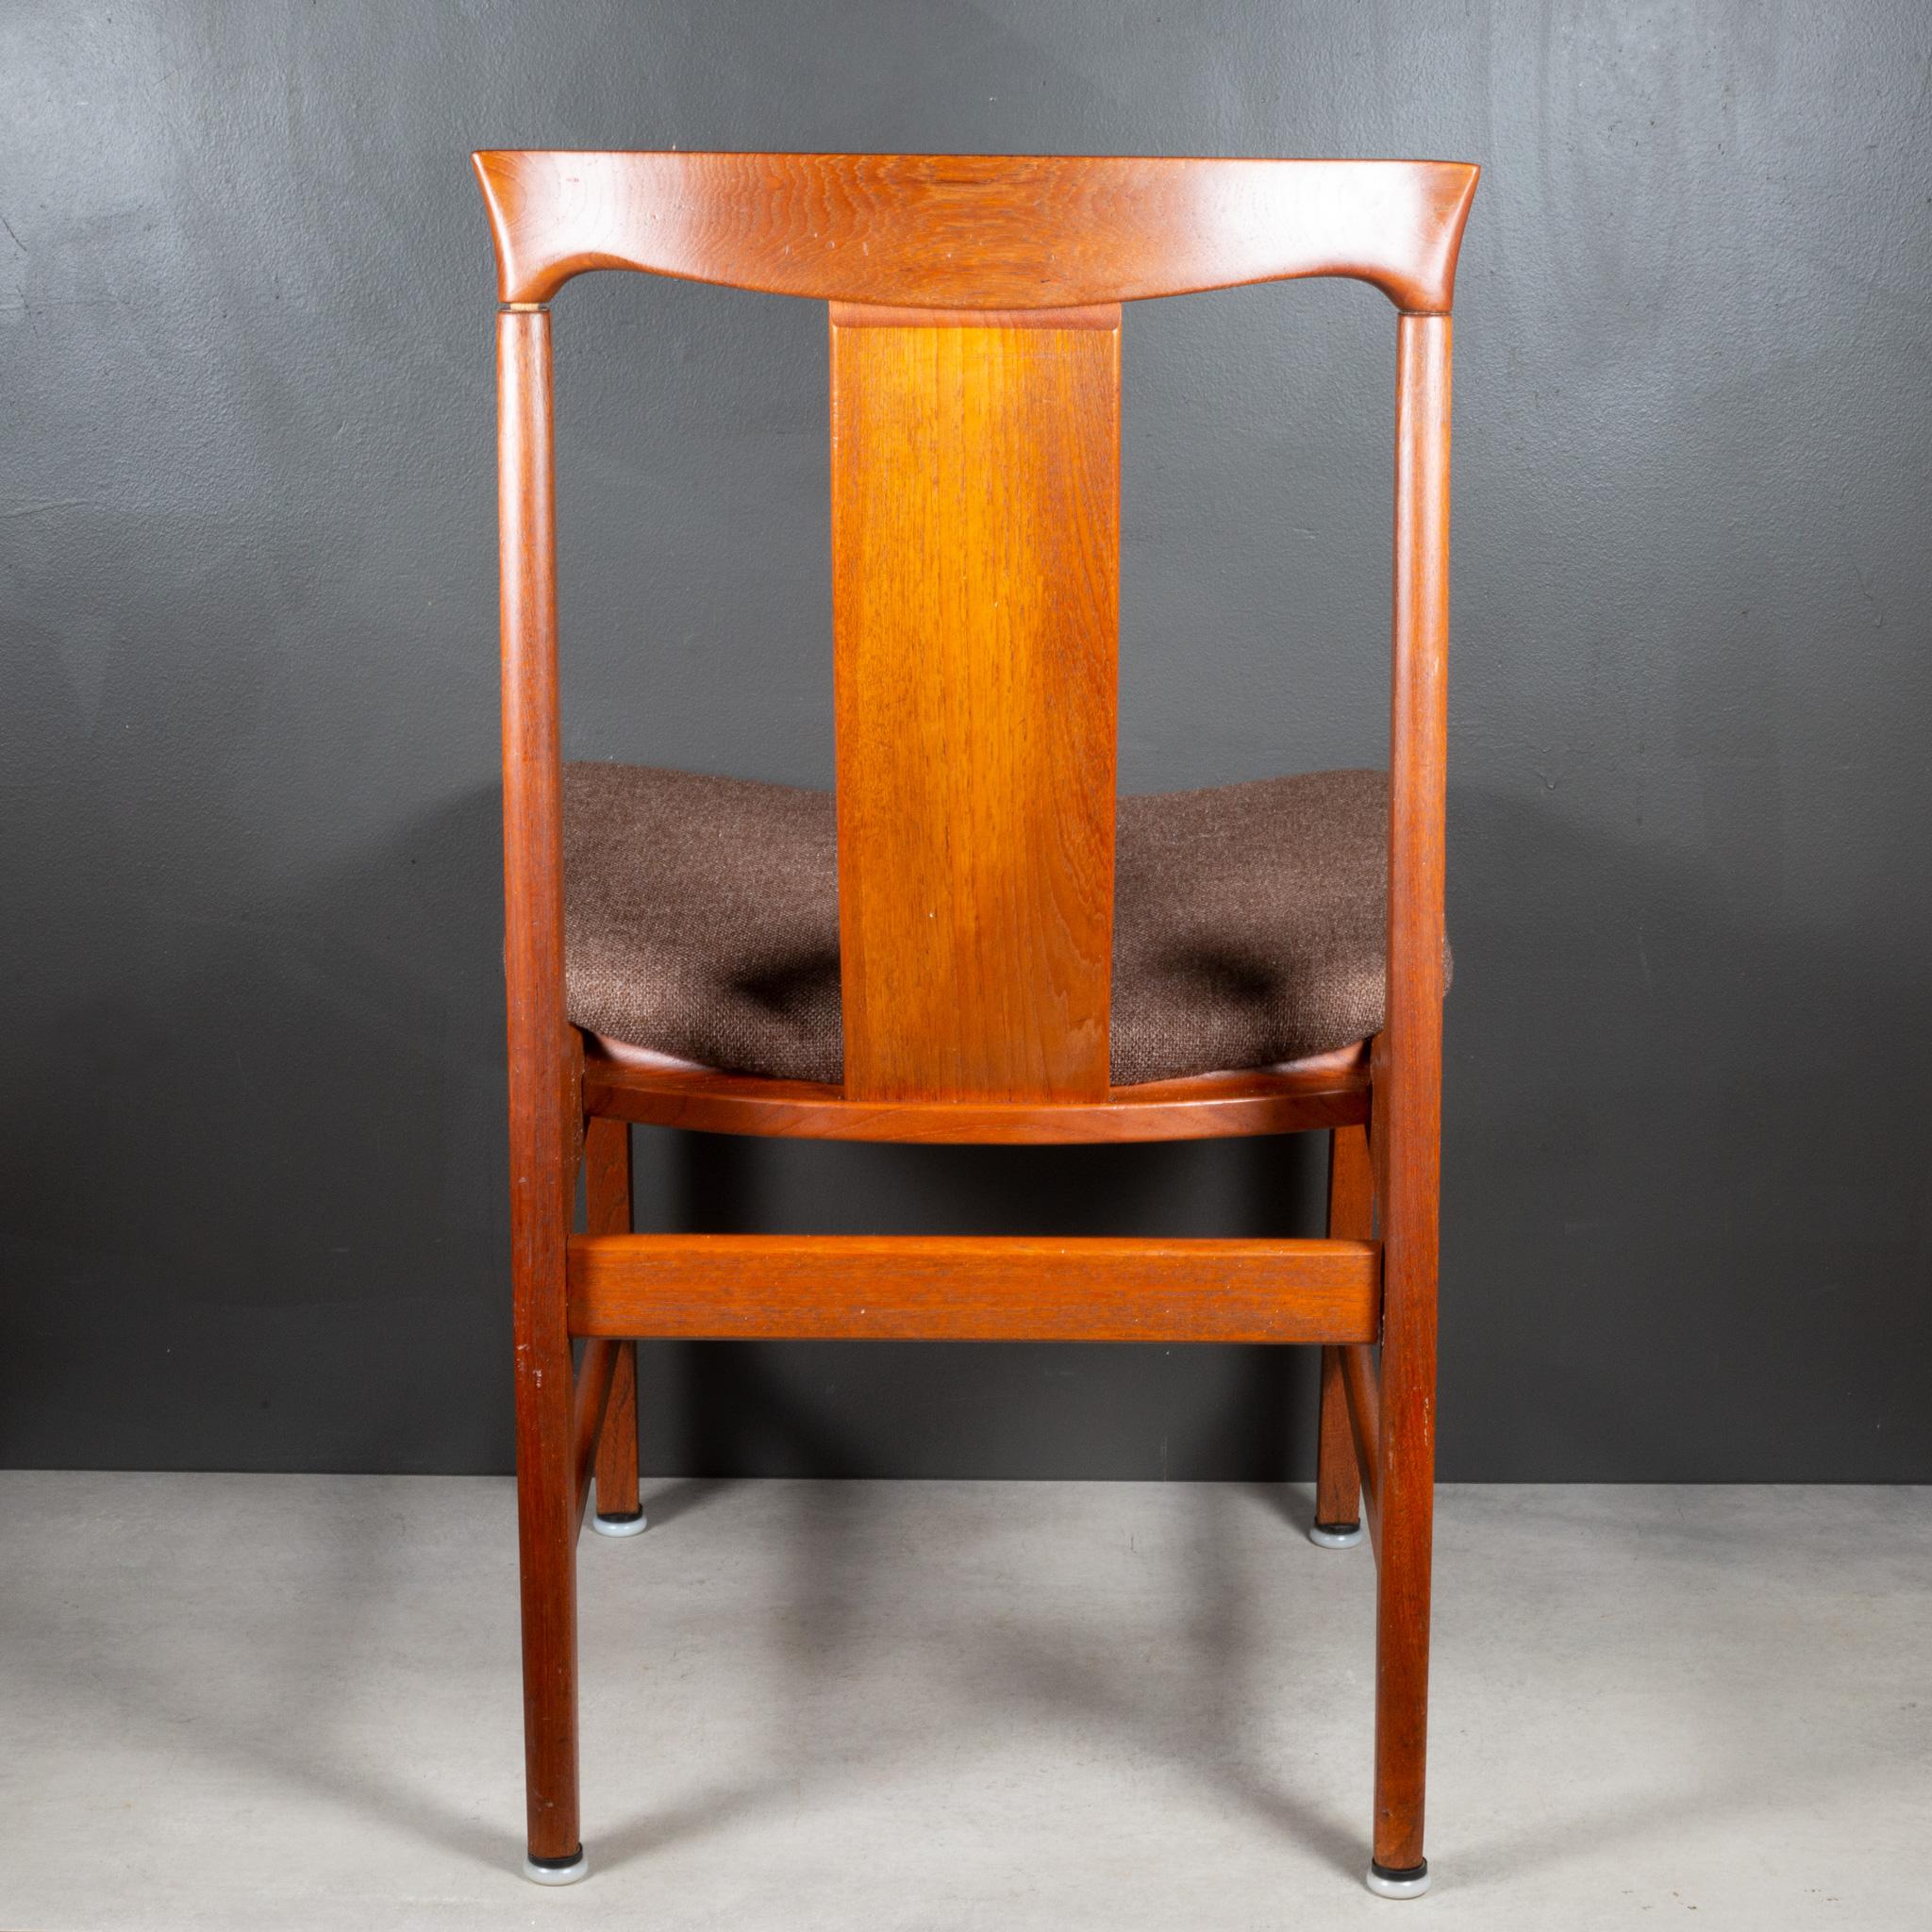 Danish Midcentury Japanese Sculpted Teak Dining Chairs C.1960 For Sale